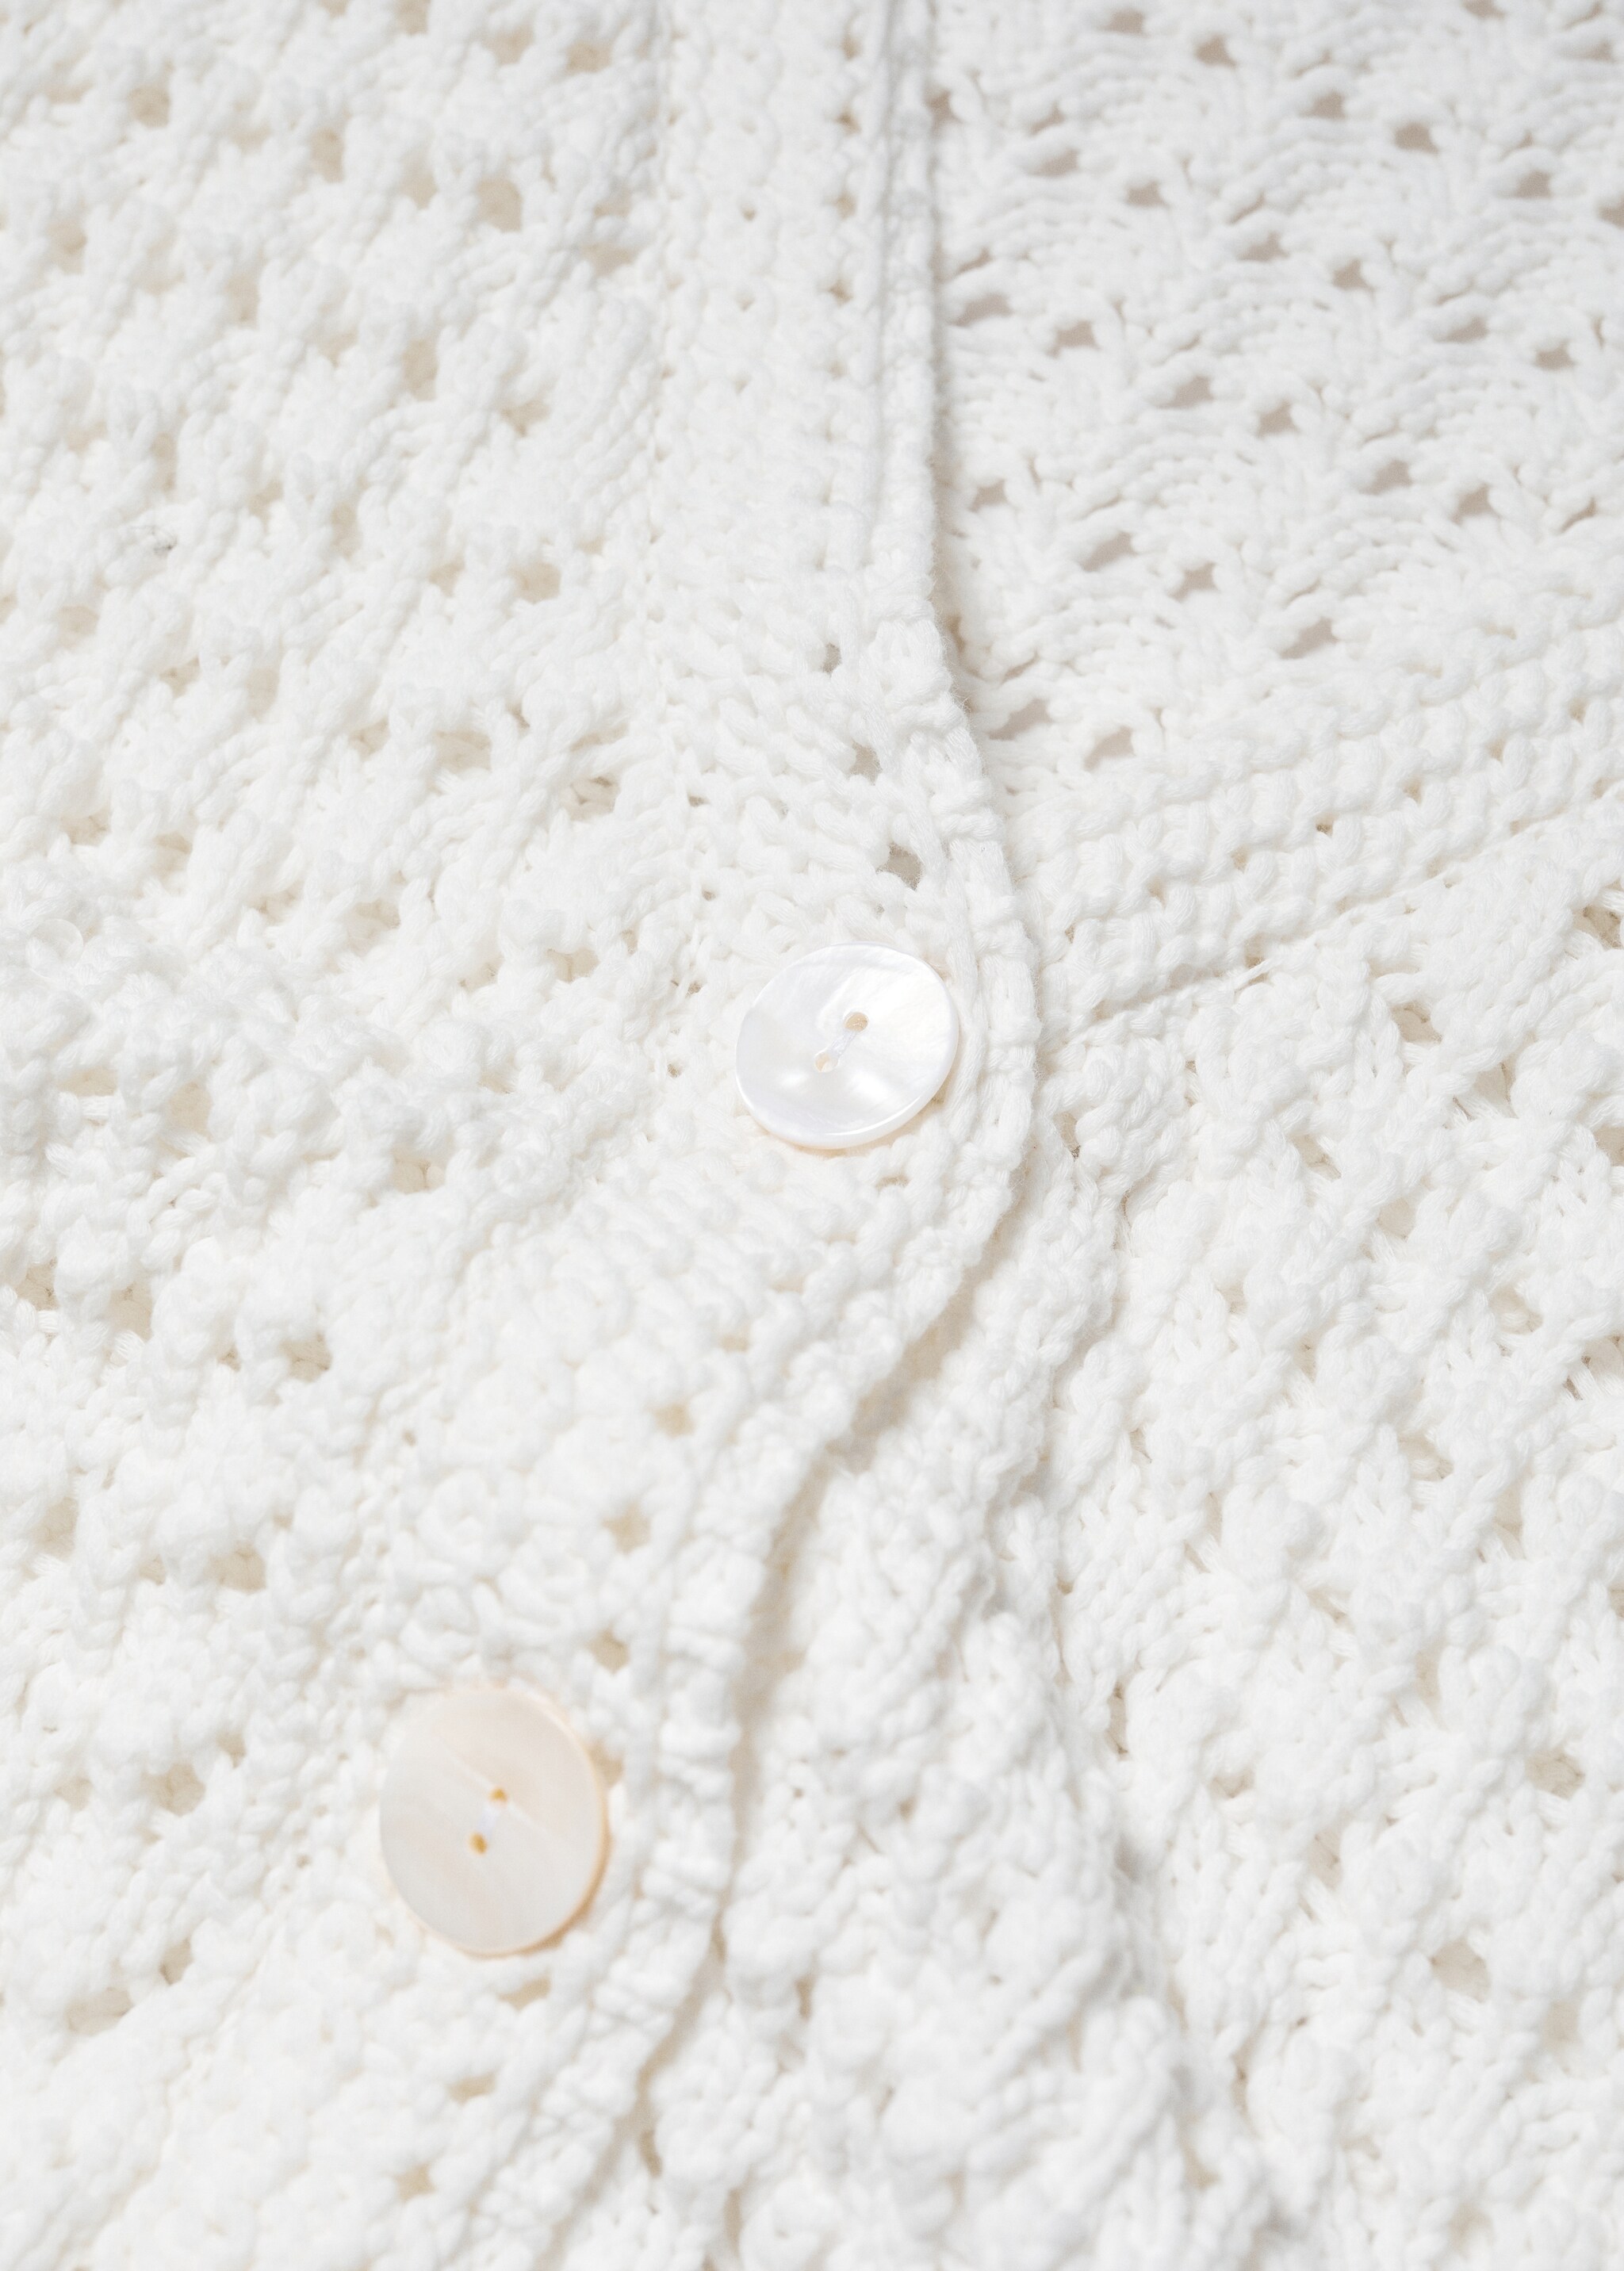 Openwork knit cardigan - Details of the article 8